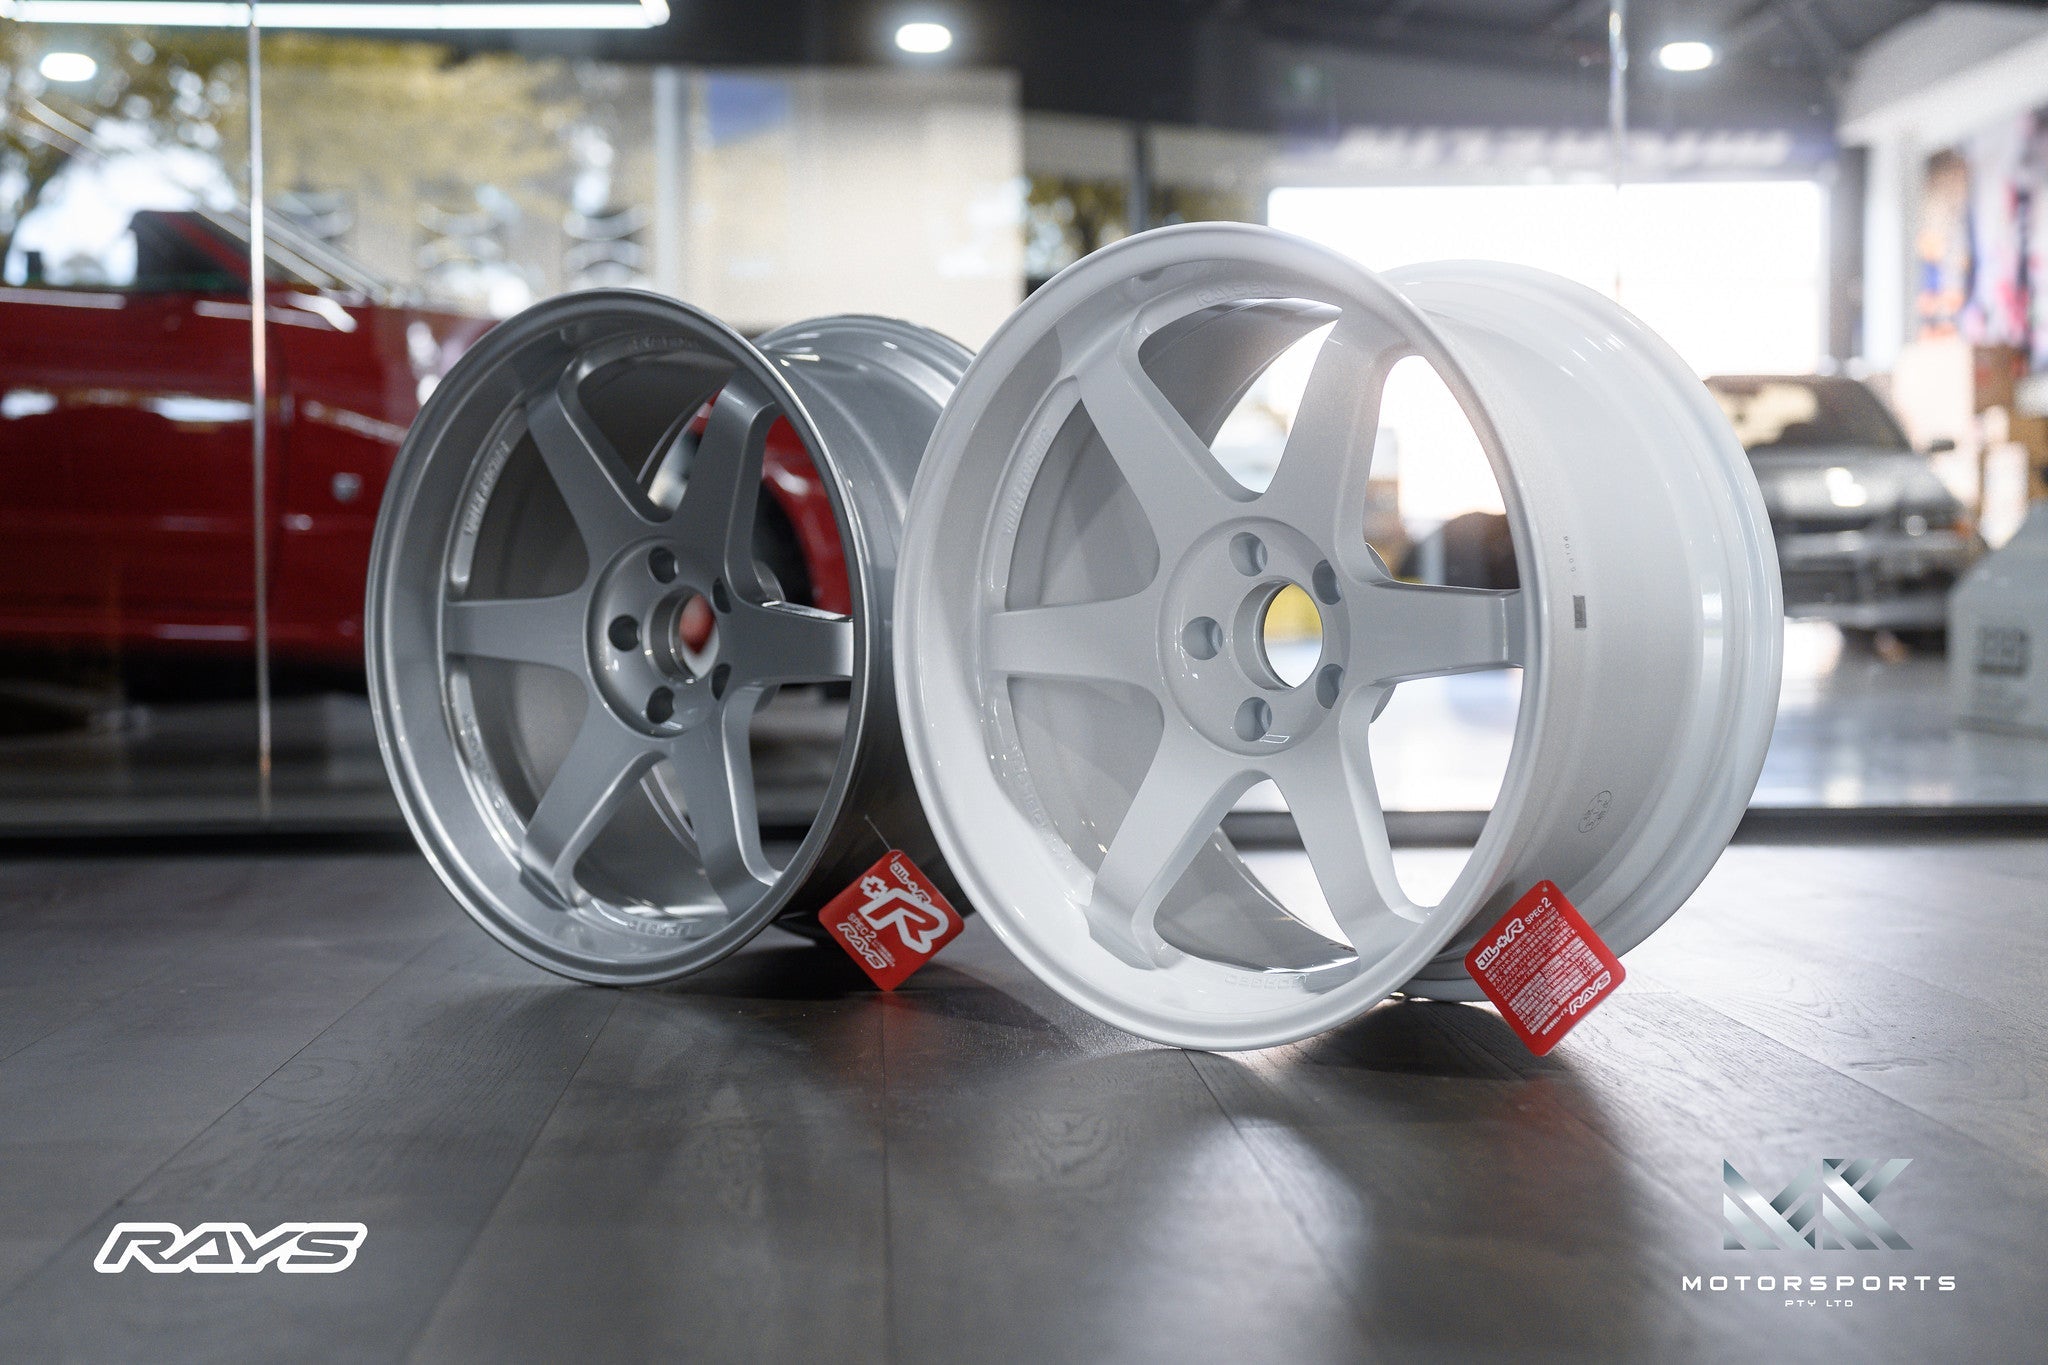 Volk Racing TE37SL 19" for R34 GT-R - Premium Wheels from Volk Racing - From just $4990.0! Shop now at MK MOTORSPORTS